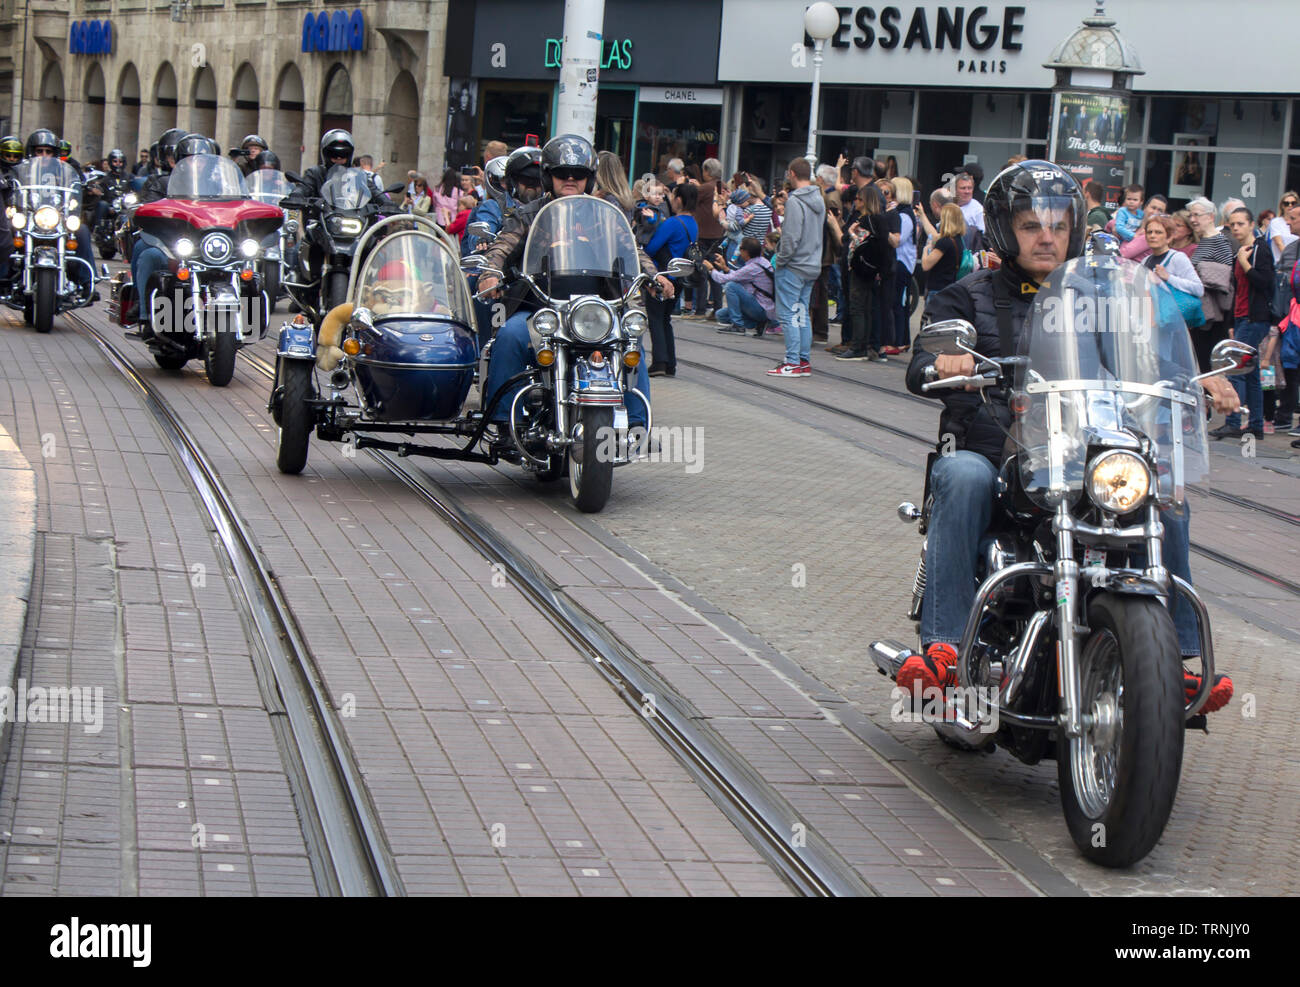 ZAGREB, CROATIA - JUNE 01 Group of motorcycle Harley Davidson fans on the Ban Jelacic Square, on June 01, 2019 in Zagreb, Croatia Stock Photo